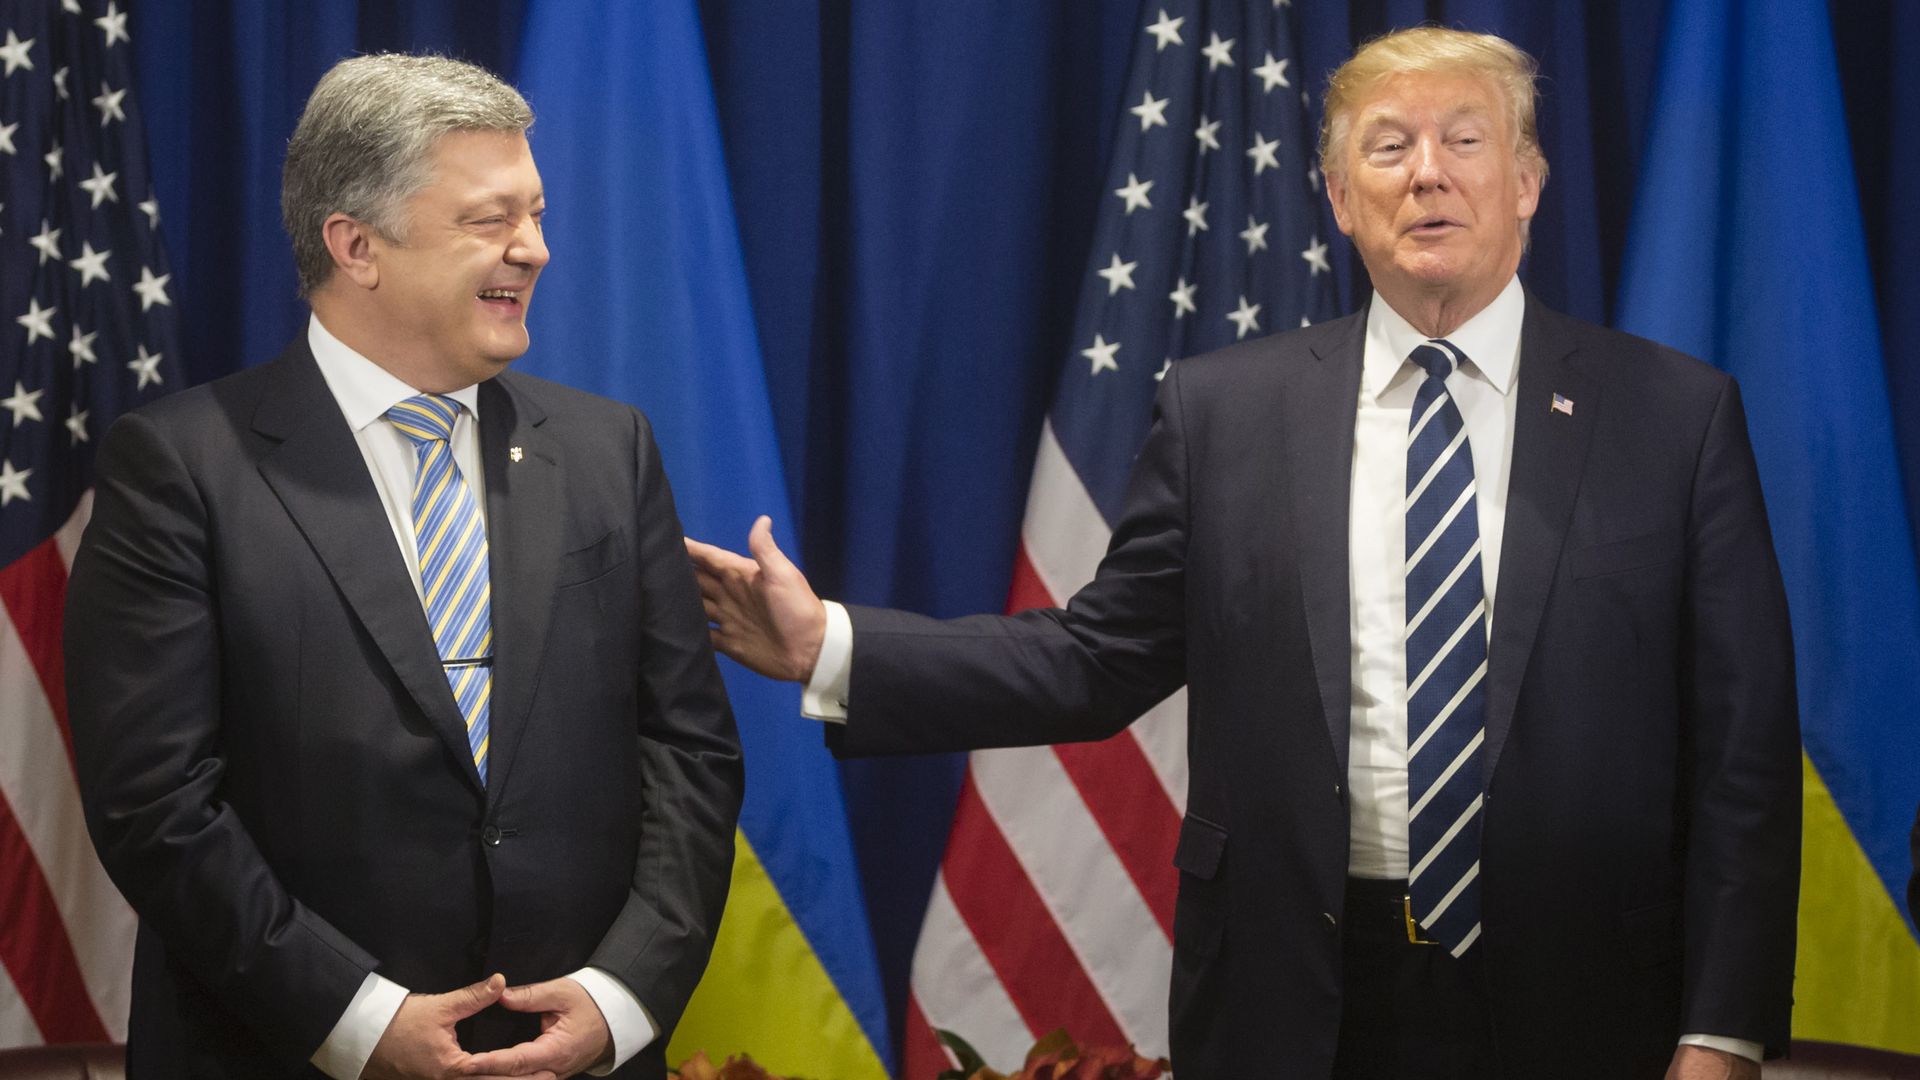 Ukraine's president and President Trump smile at an event in 2017.